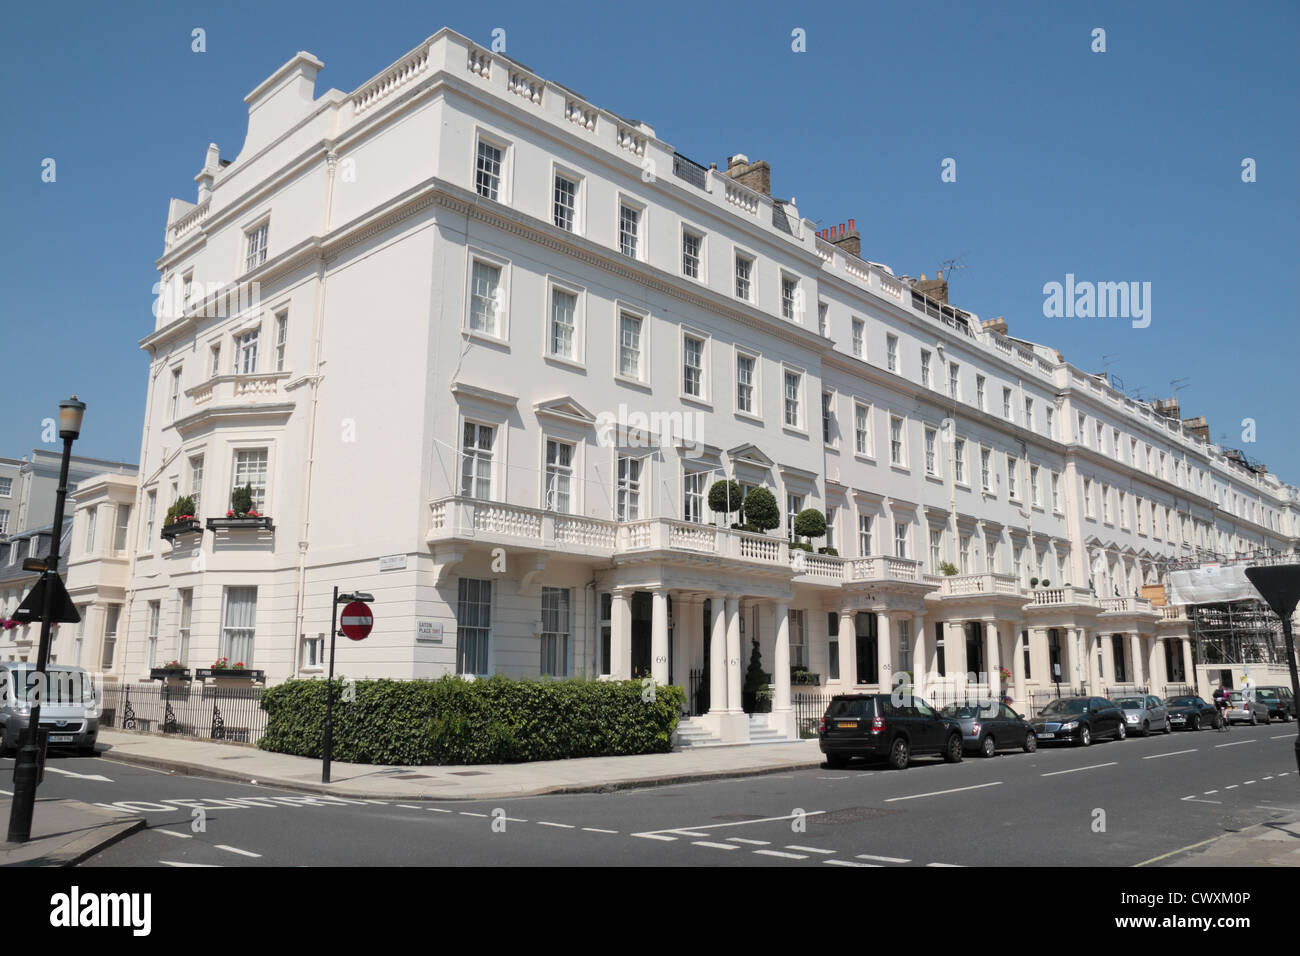 View of the junction of Eaton Place and Lyall Street, Belgravia, City of Westminster, London, SW1, UK. Stock Photo